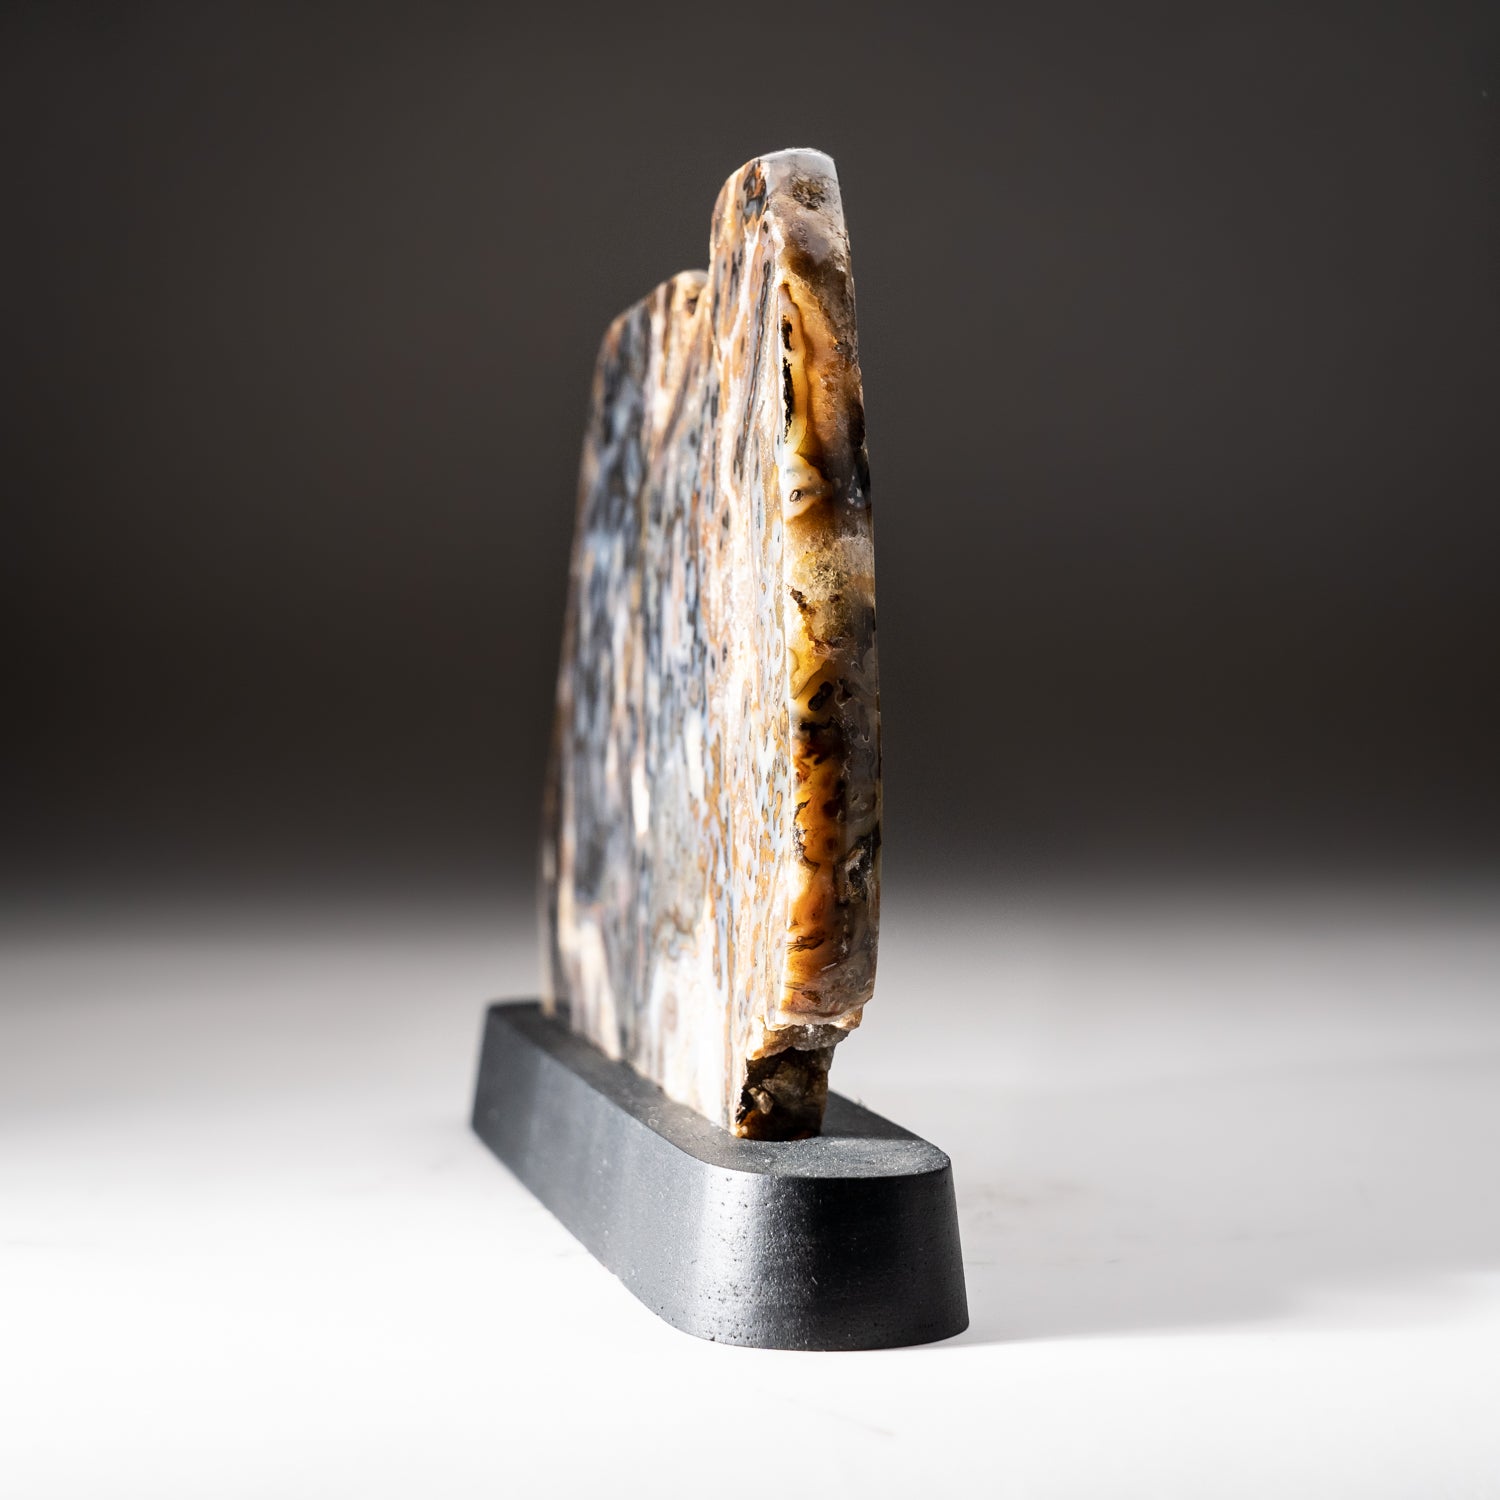 Polished Natural Agate Slice on Wooden Stand (1.8 lbs)